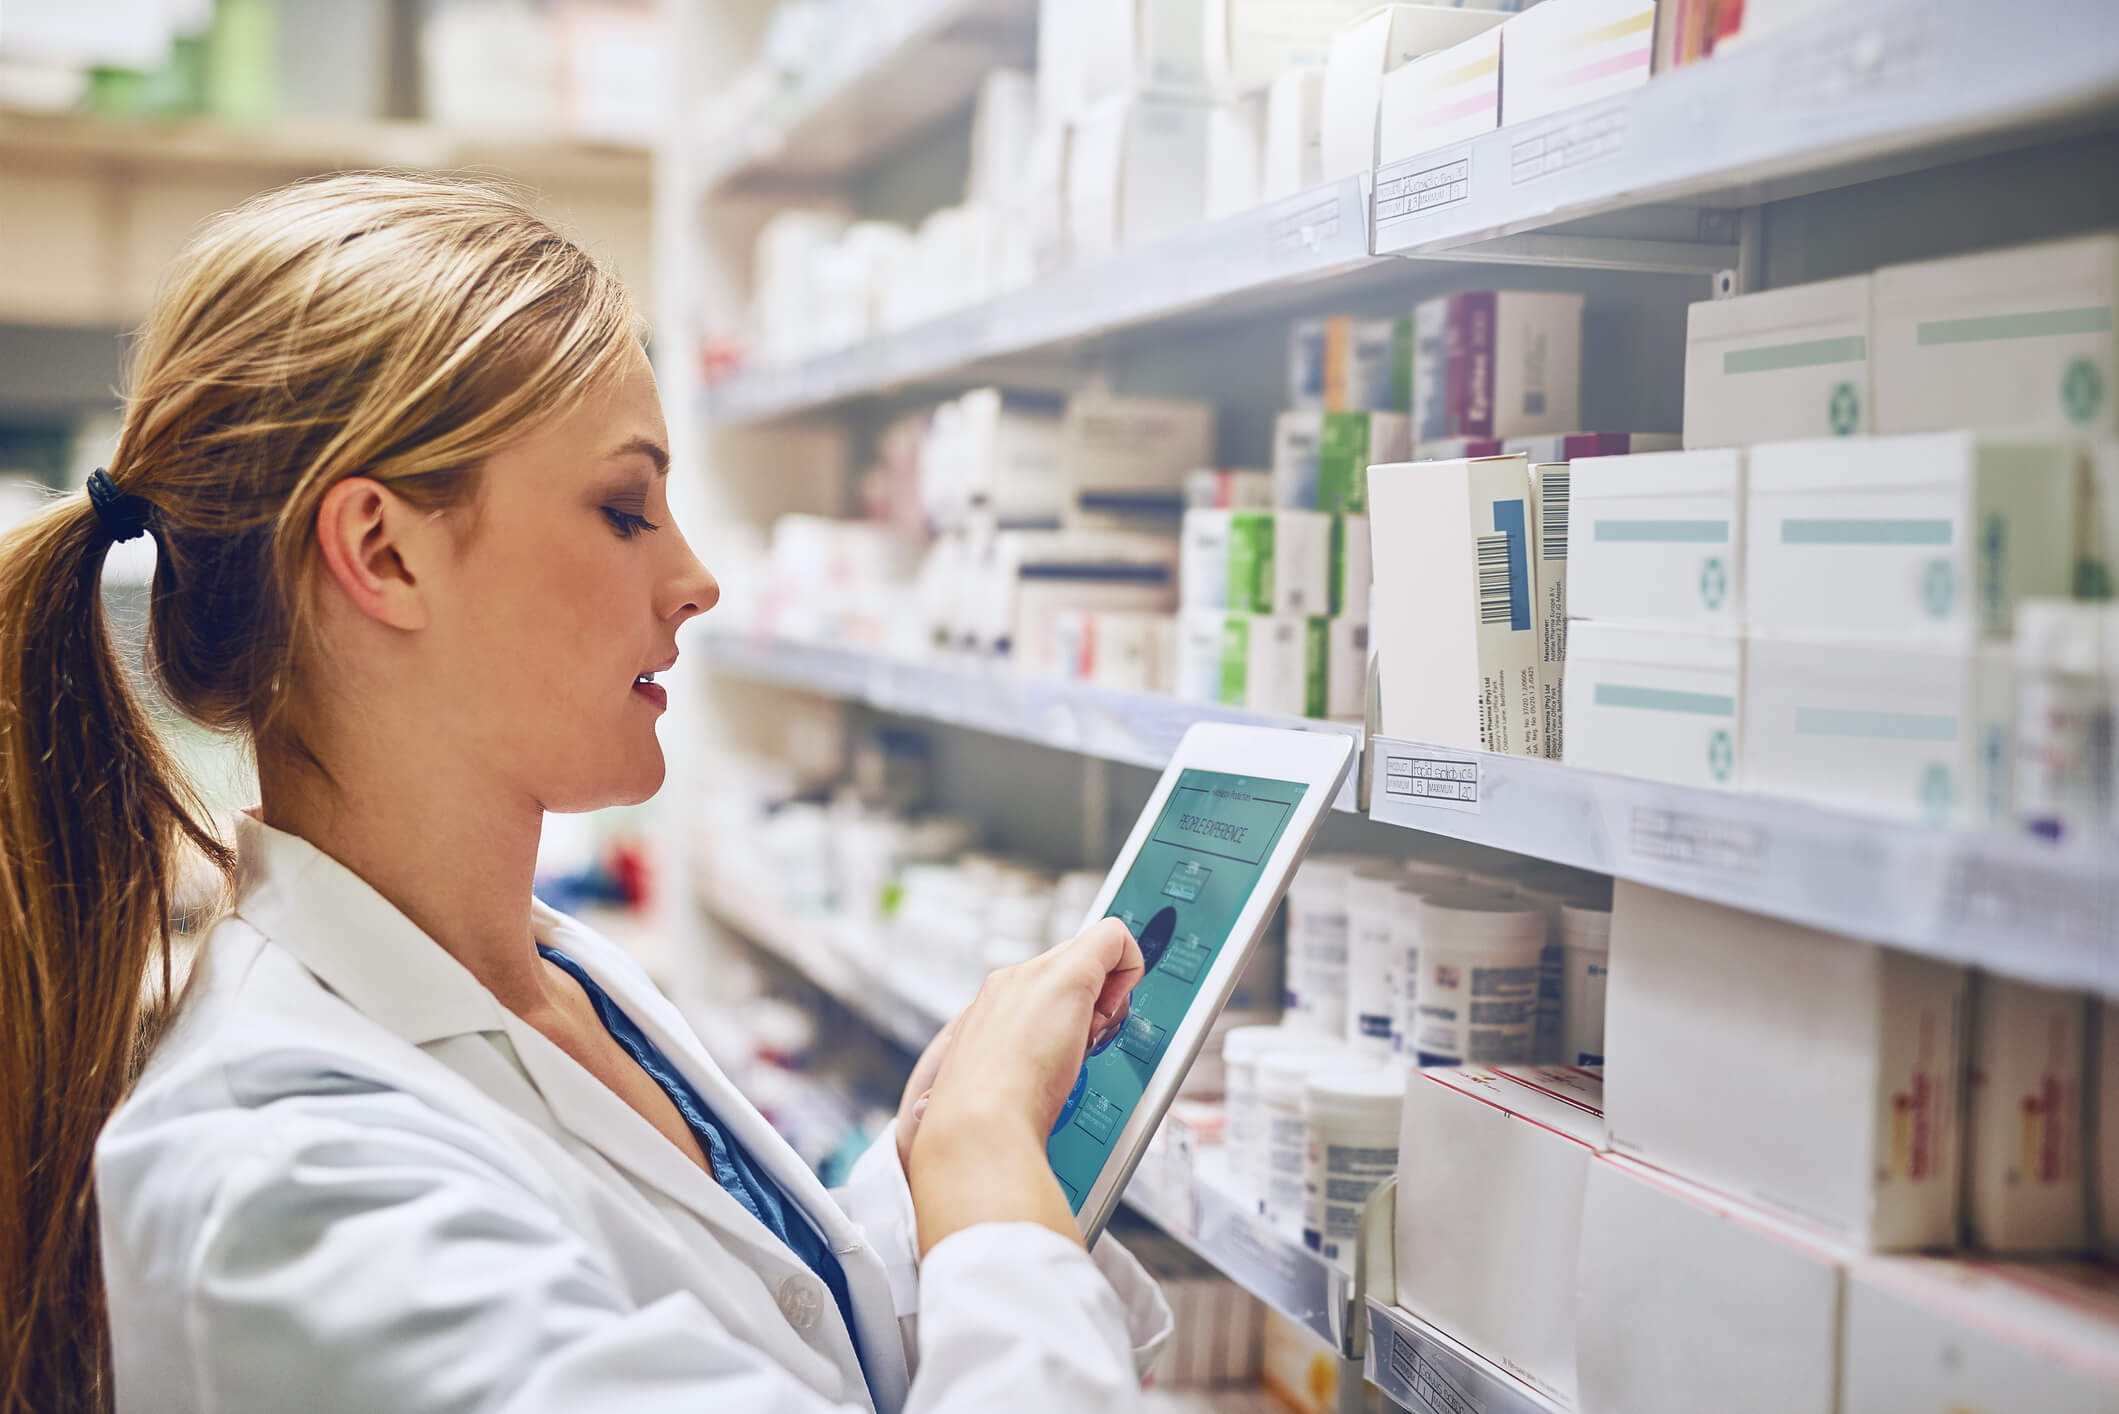 Pharmacy worker checking drug inventory on ipad